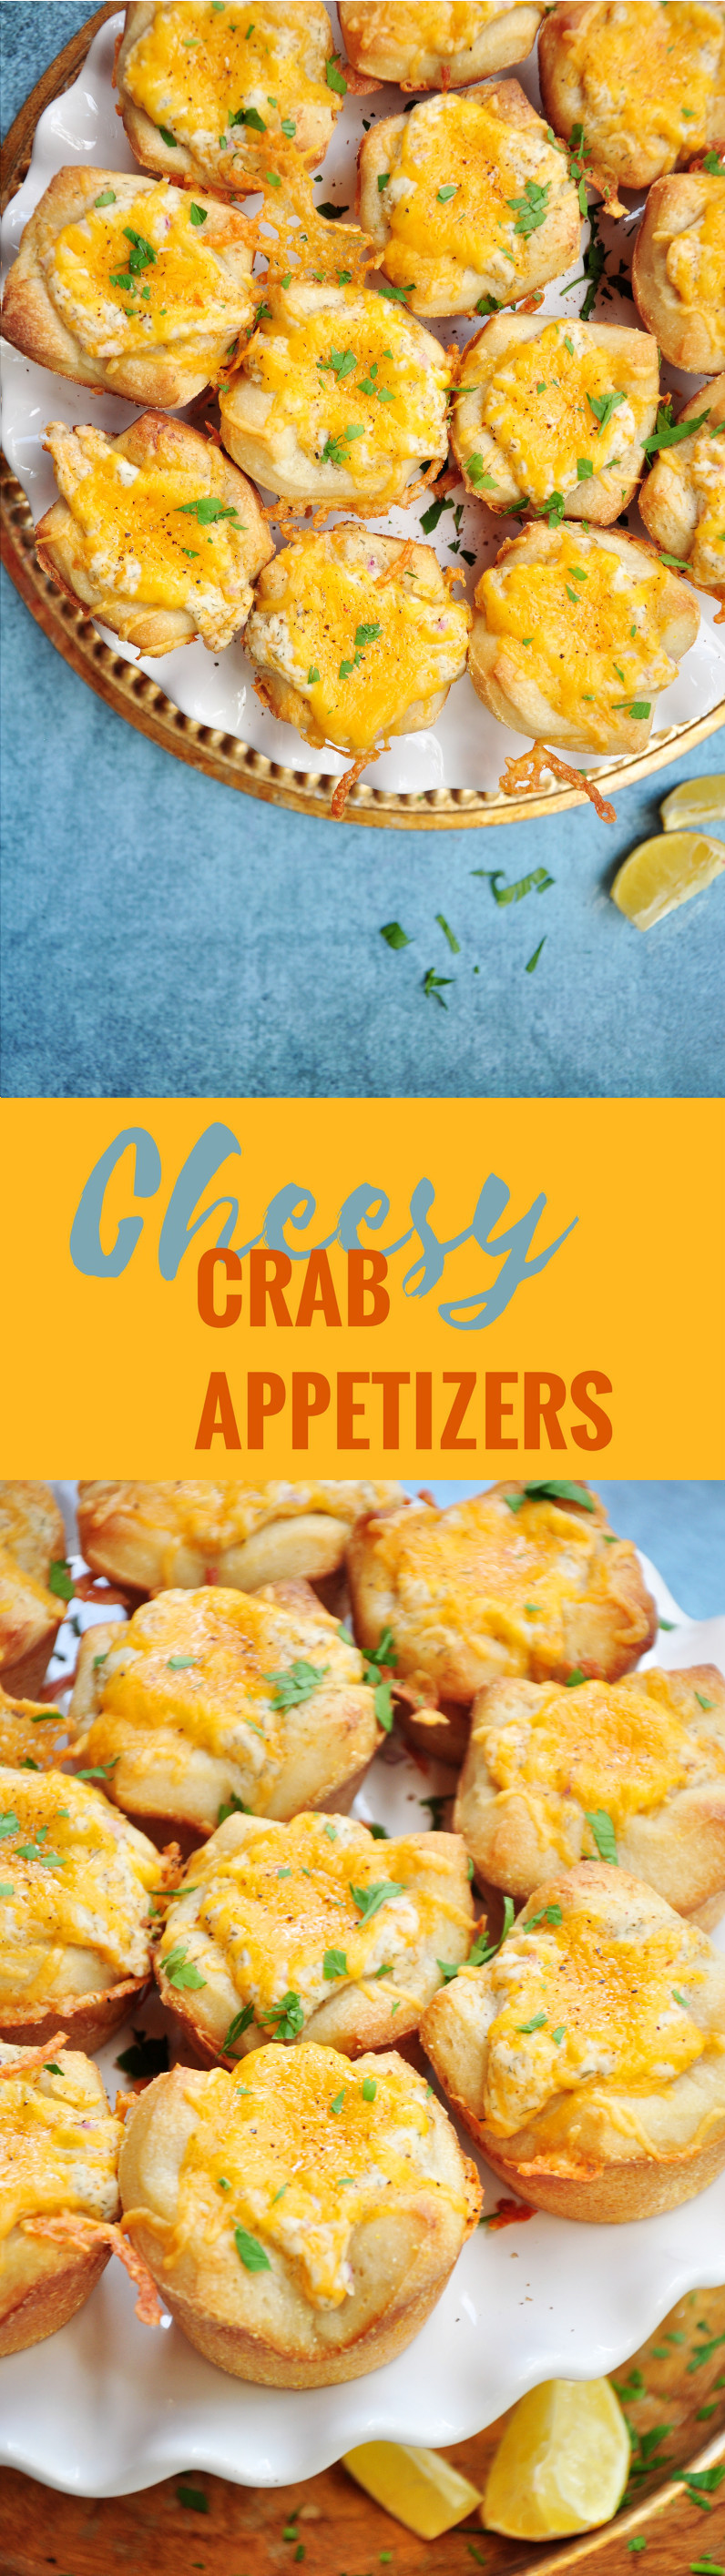 Cheese, crab, herbs and lemon, plus a pizza crust shaped into muffin cups, these cheesy crab appetizers are super fun and quick to make.